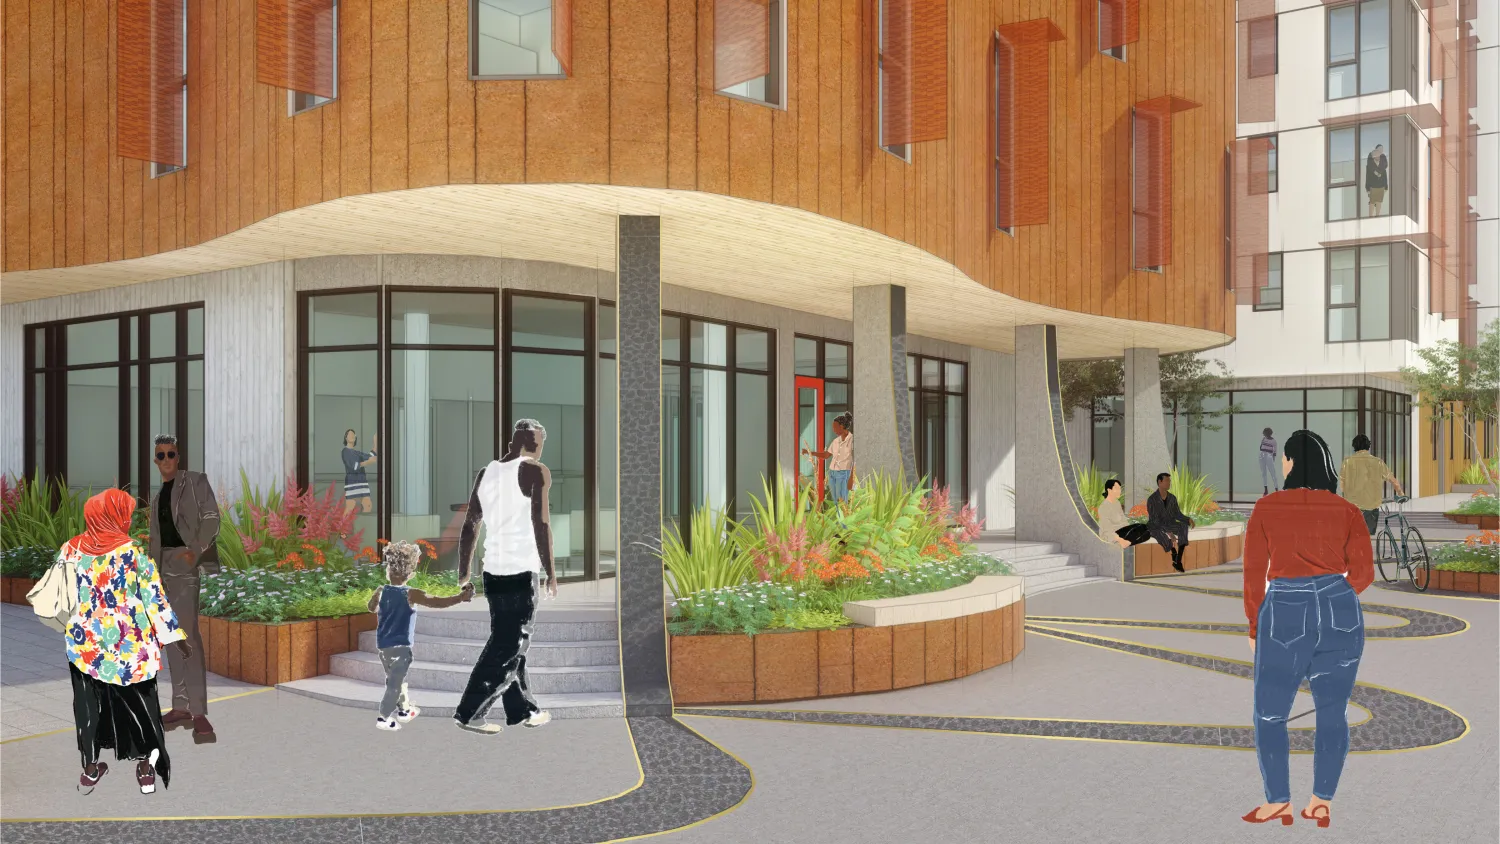 Rendering of the plaza at Africatown Plaza in Seattle, Washington.